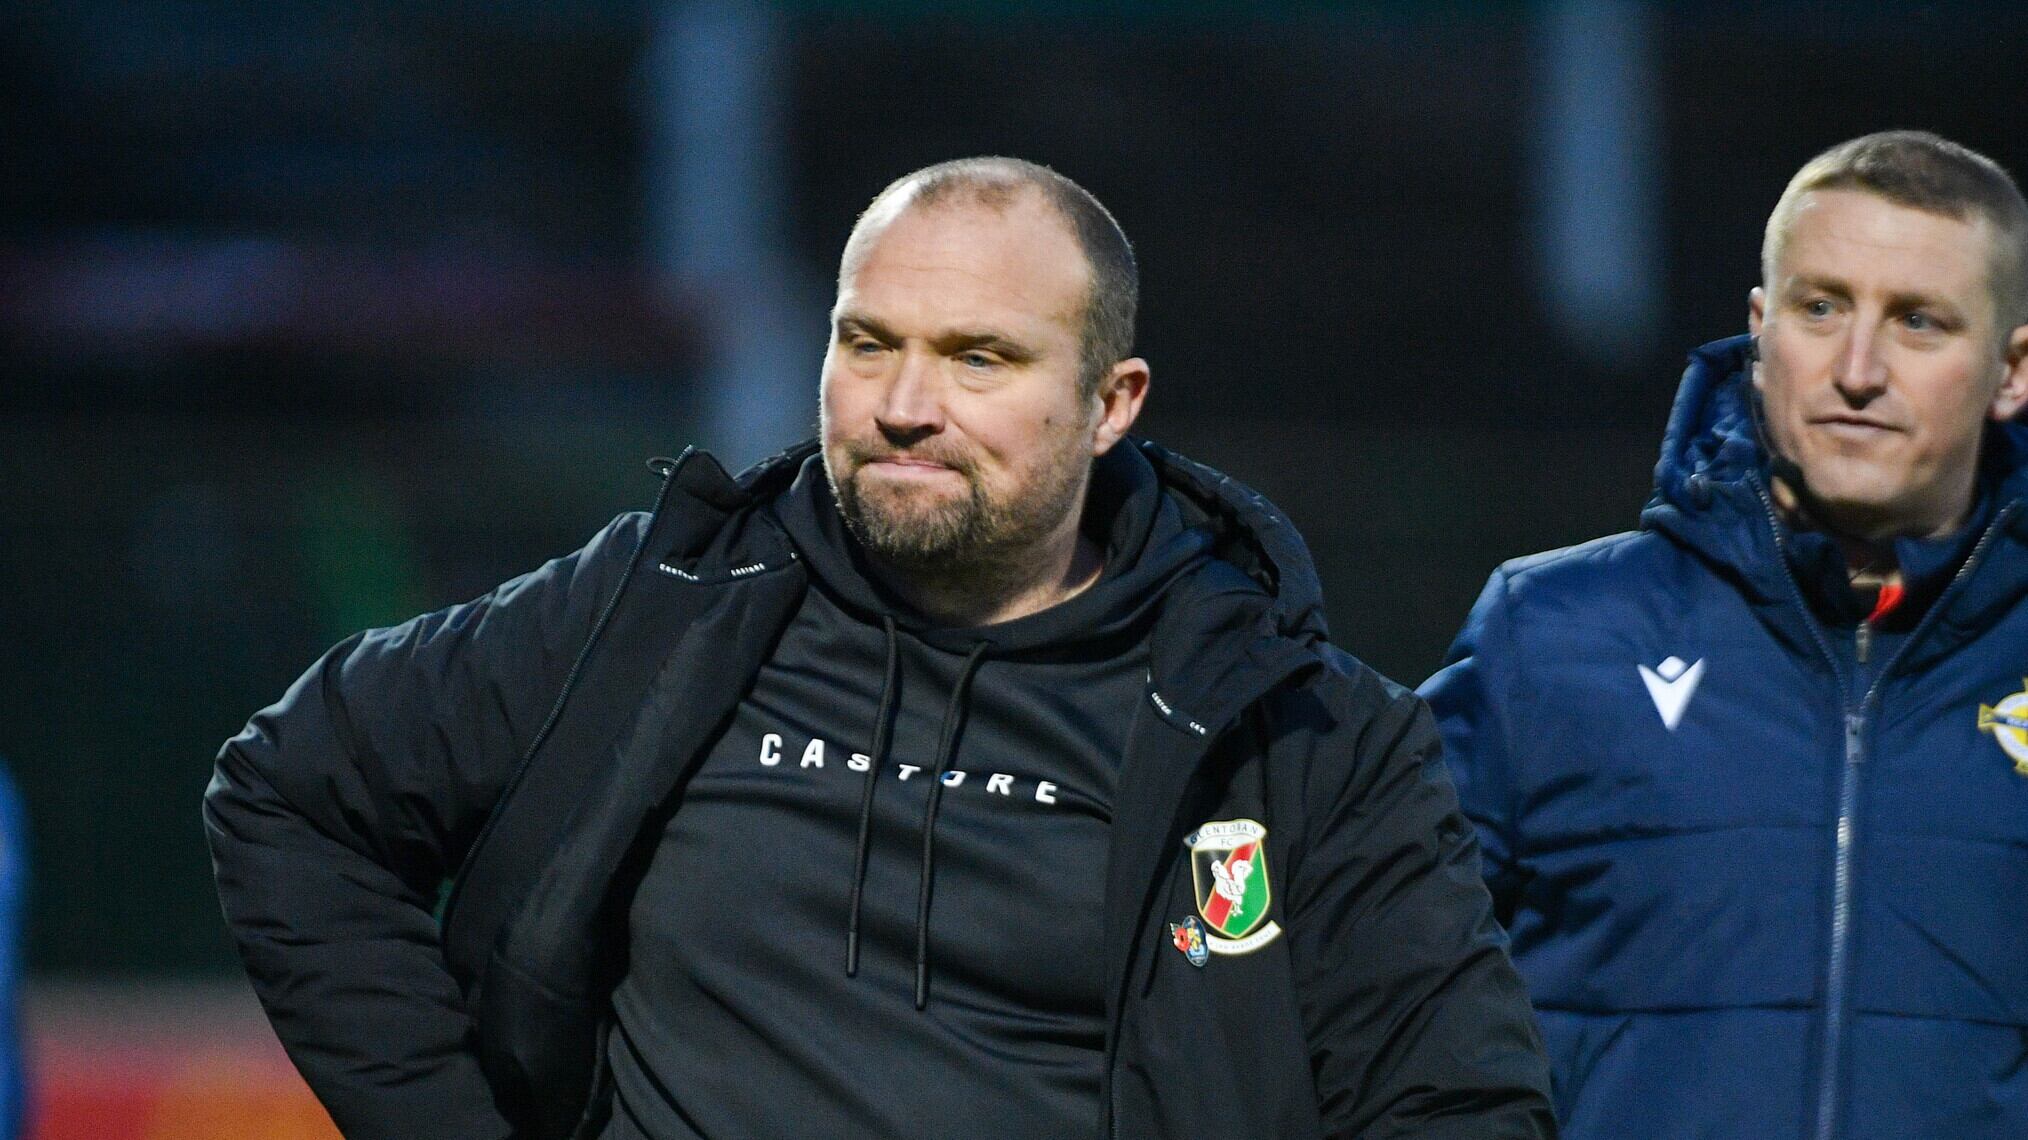 Saturday's defeat to Carrick Rangers at the Oval has piled more pressure on Glentoran manager Warren Feeney